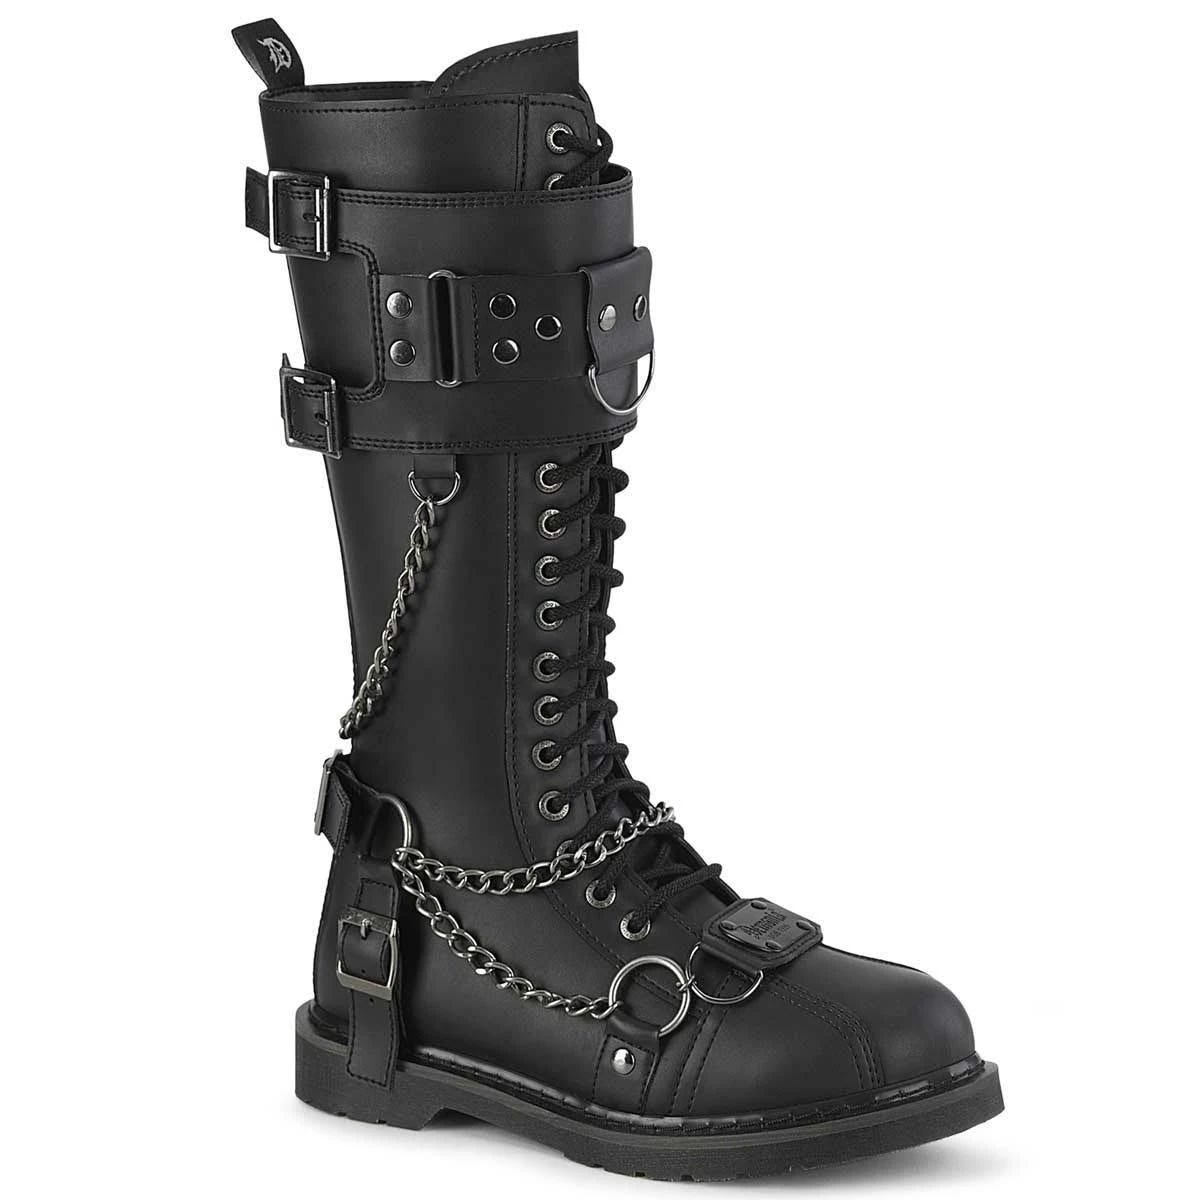 Bolt-415 Studded Black Knee High Combat Boots with Chain Detailing | Image